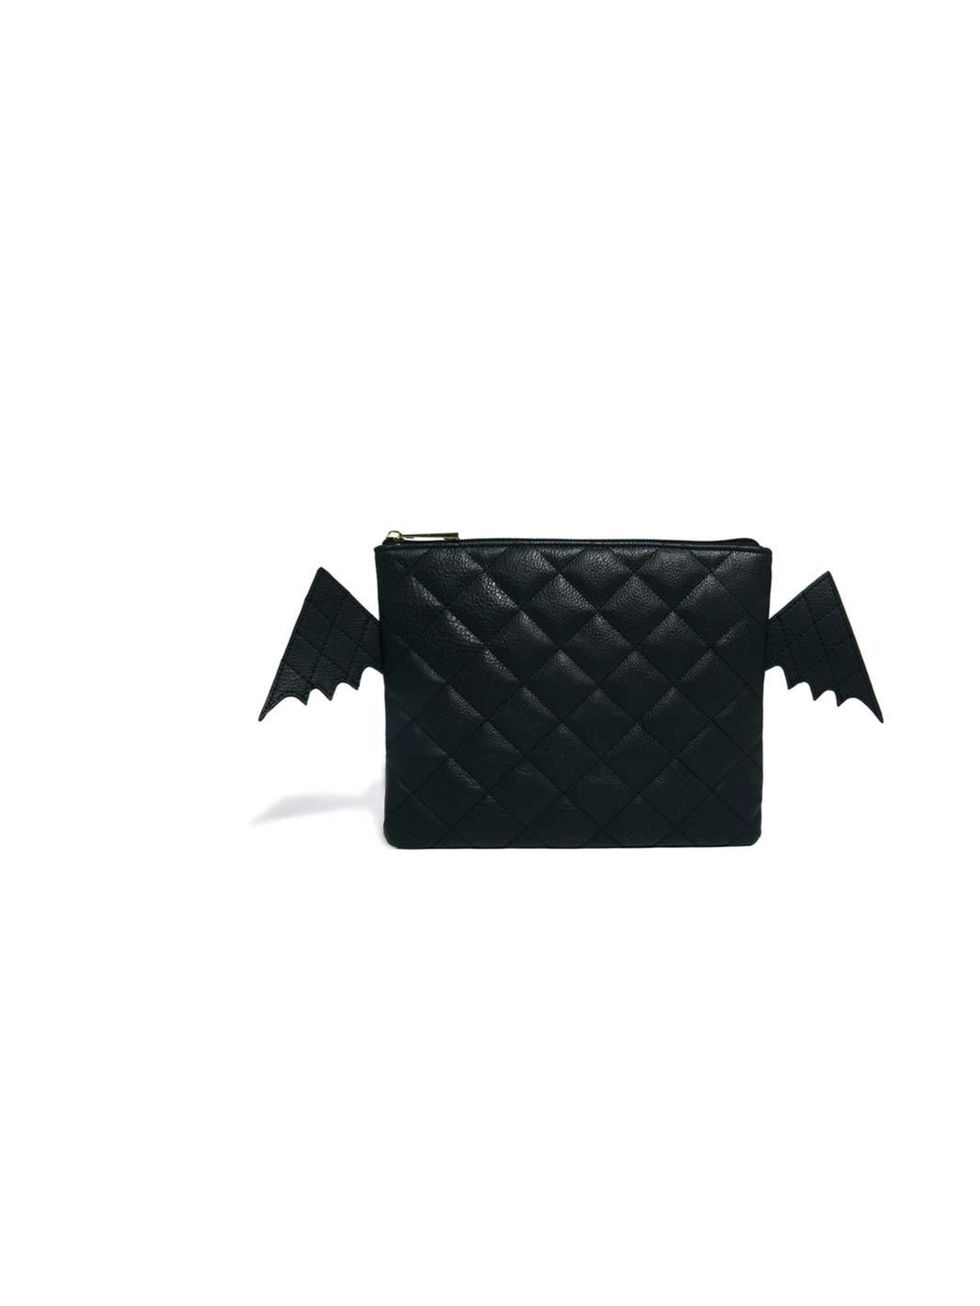 <p>Not going to a proper costume party this year? Sneak a little spooky into your everyday garb with this bat clutch like Fashion Assistant Molly Haylor.</p><p><a href="http://www.asos.com/ASOS/ASOS-Bat-Clutch-Bag/Prod/pgeproduct.aspx?iid=3174190&SearchRe